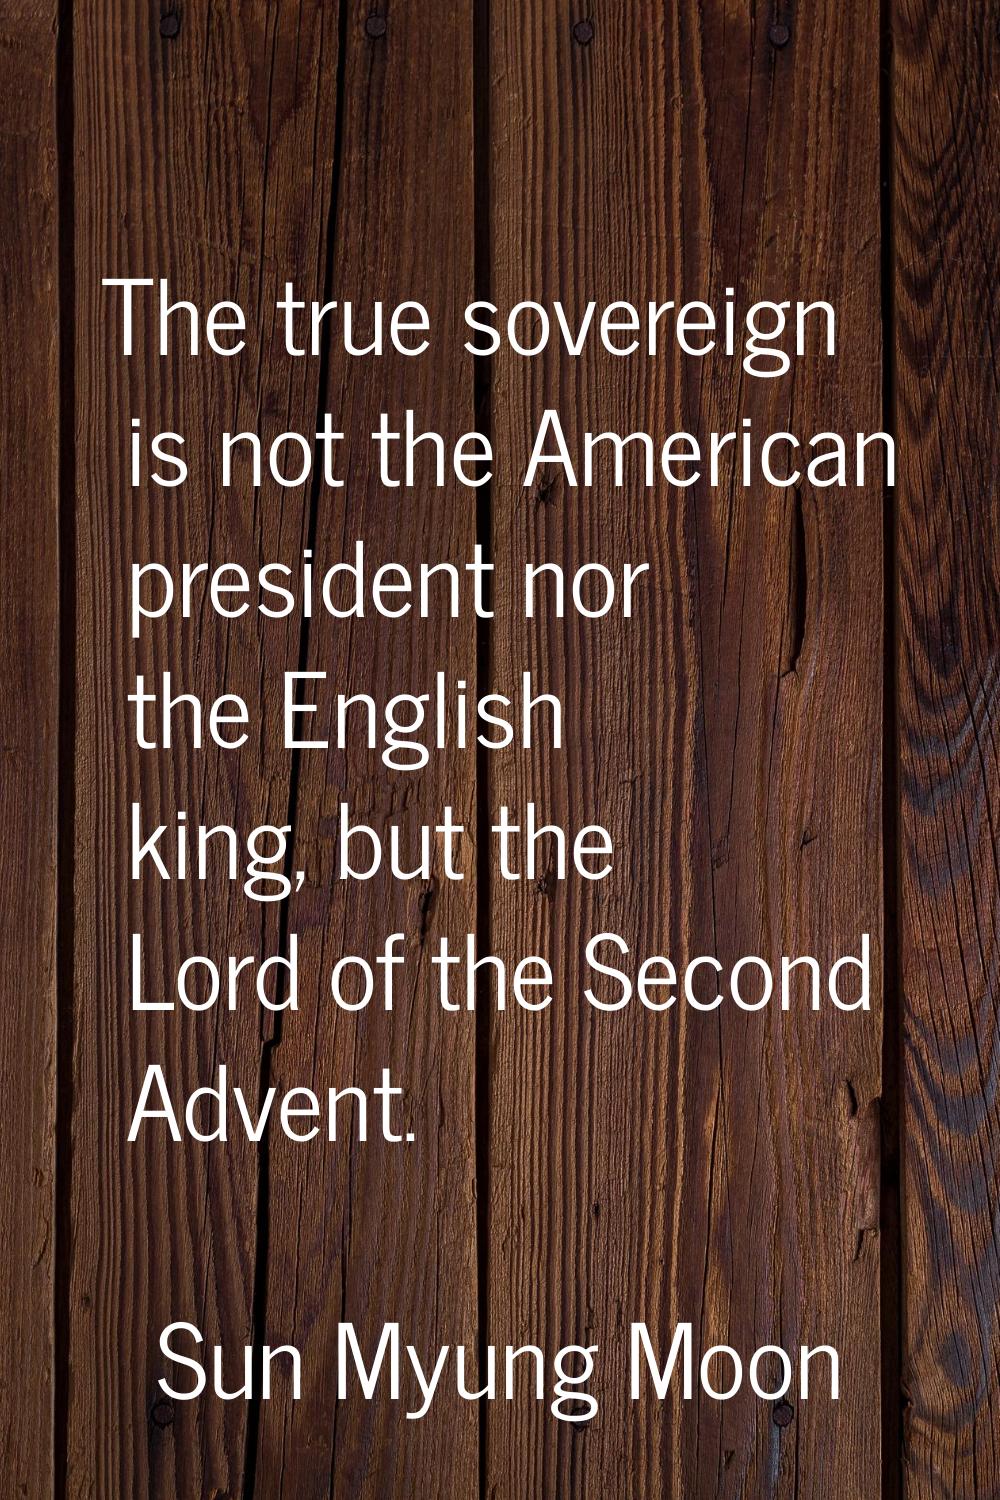 The true sovereign is not the American president nor the English king, but the Lord of the Second A